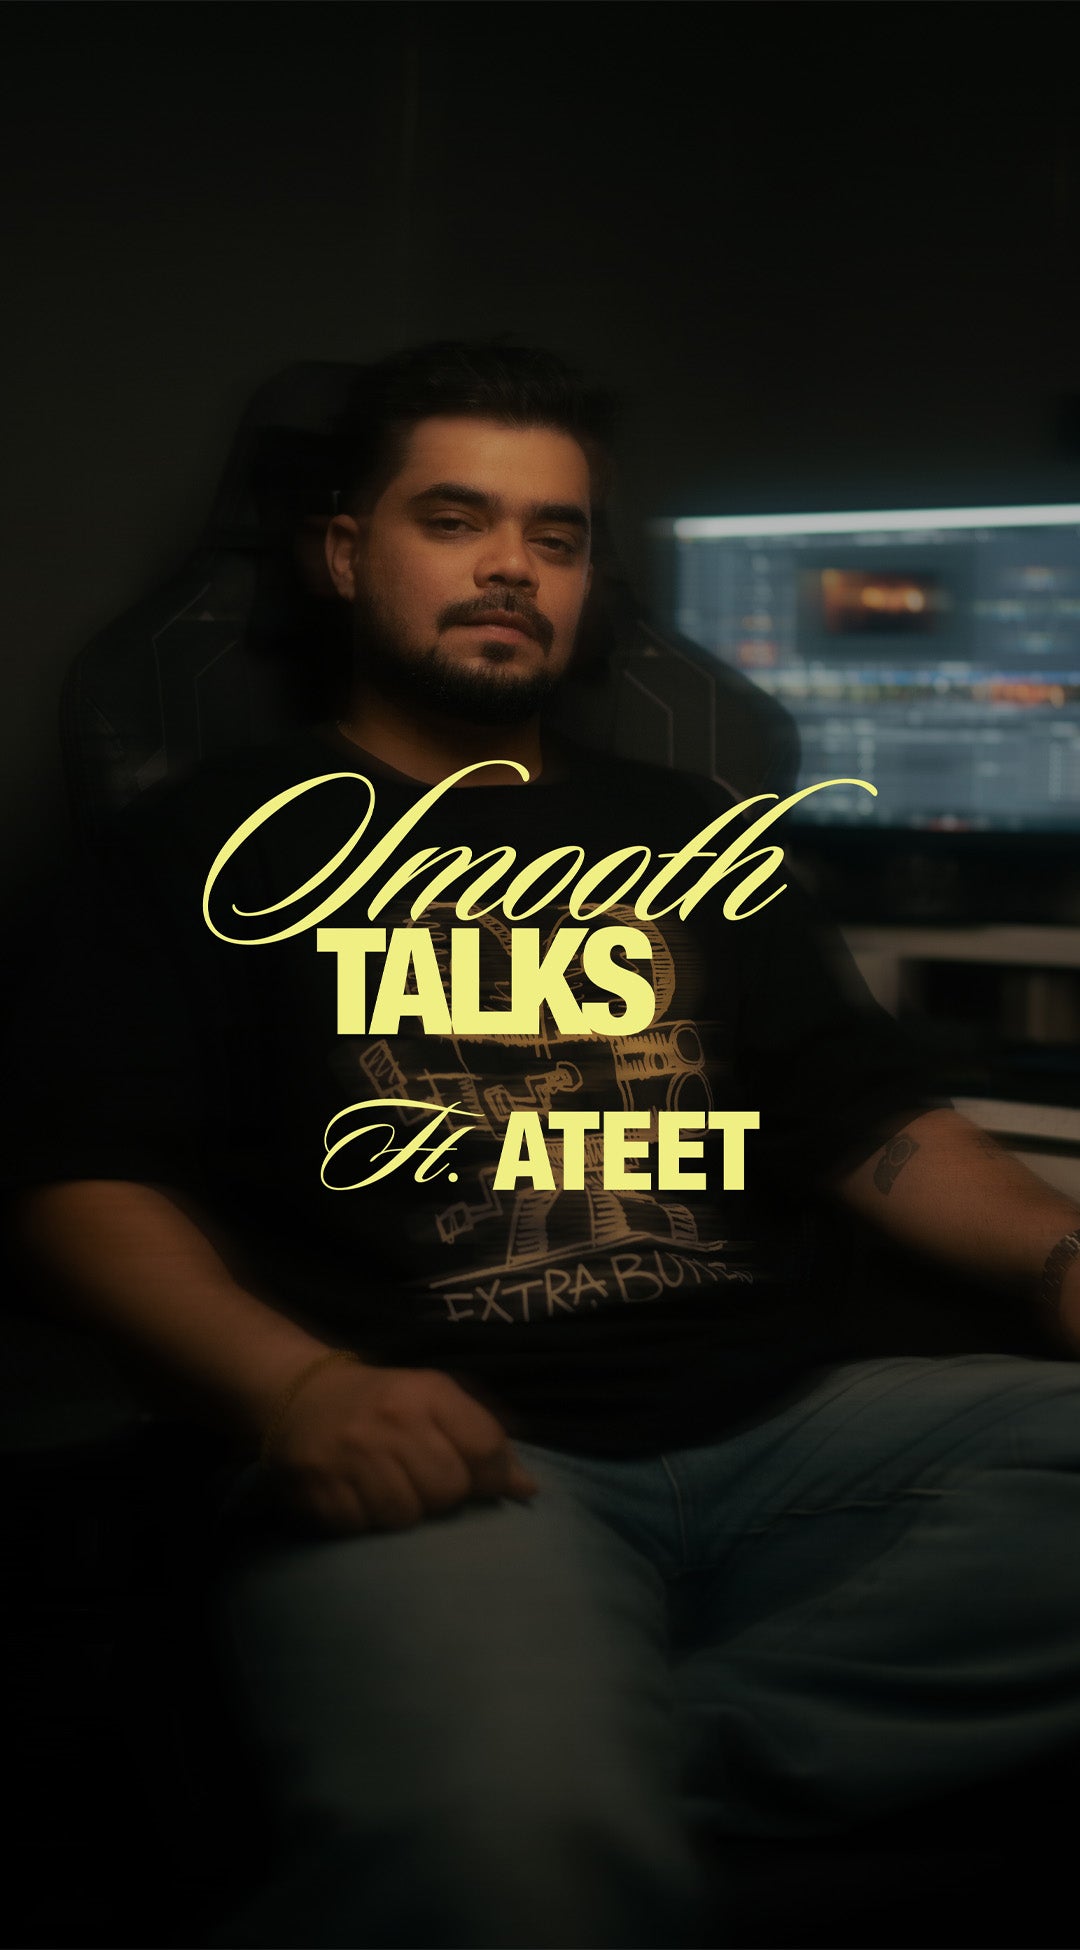 Extra Butter Smooth Talks: Featuring Ateet